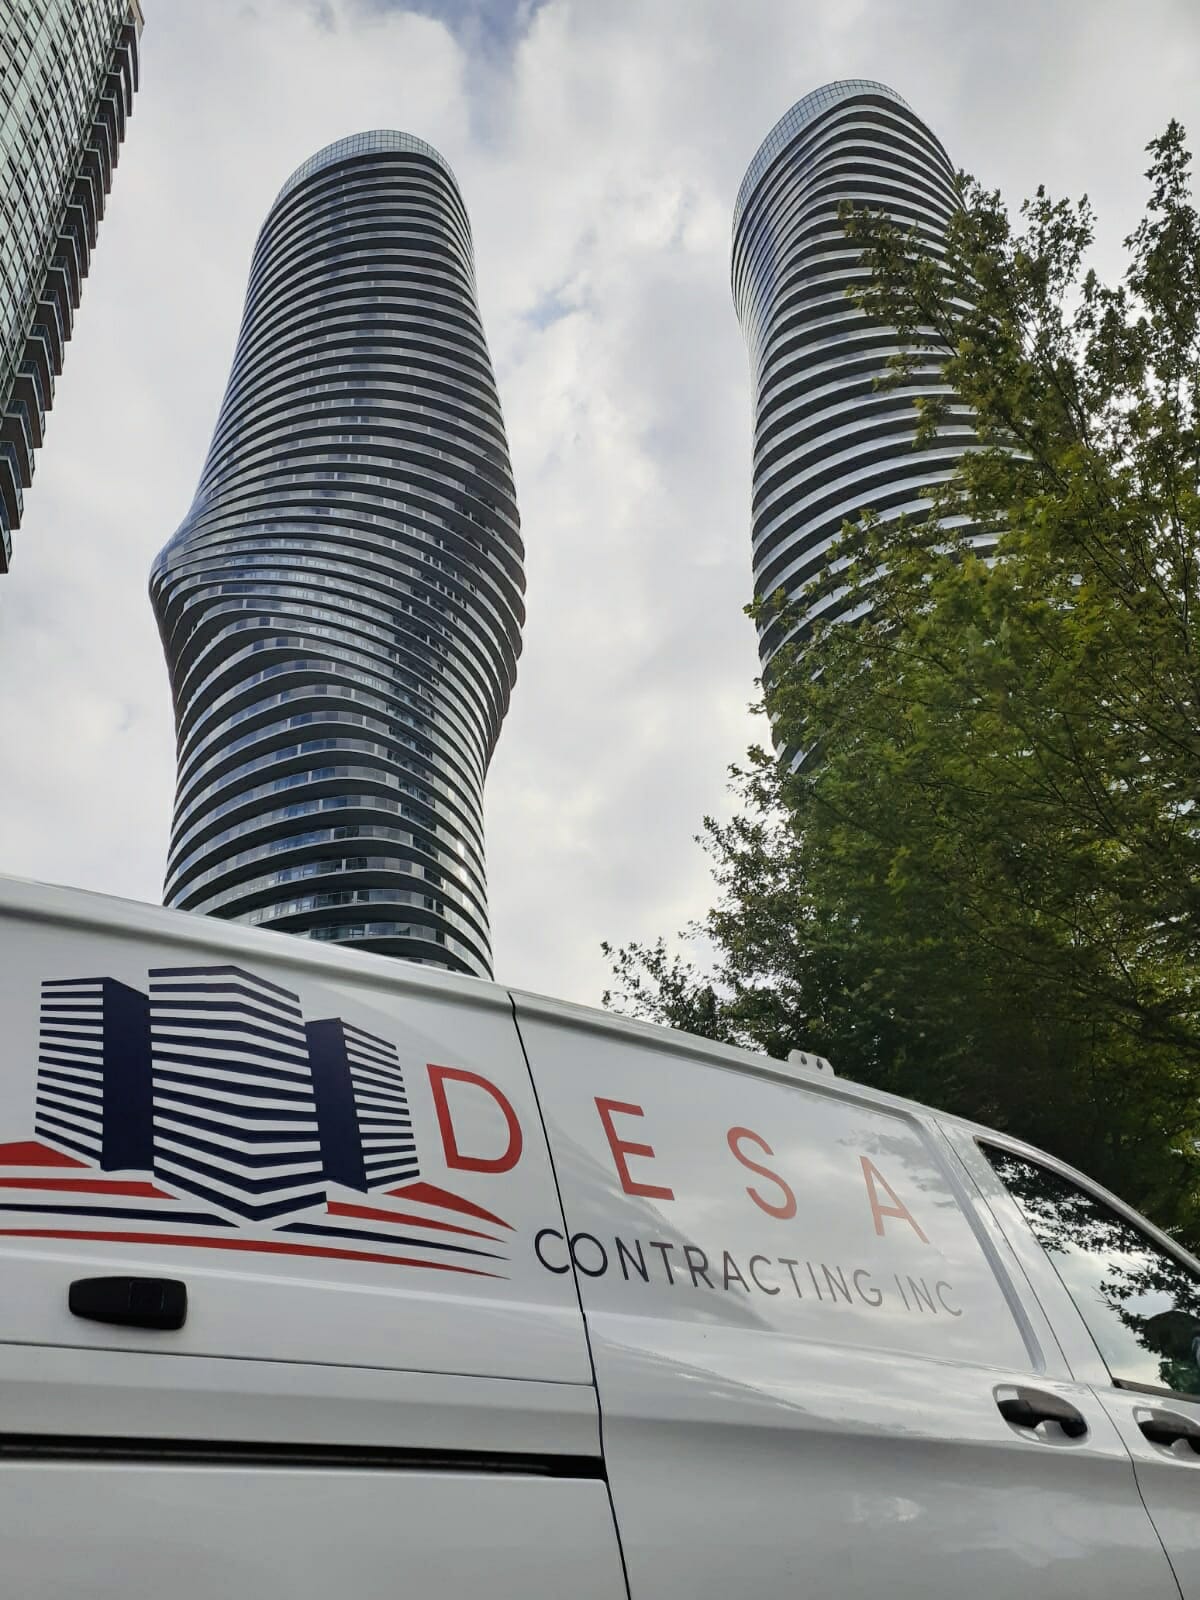 A Desa Contracting and Restorations vehicle is shown against a backdrop of Toronto buildings in this image.